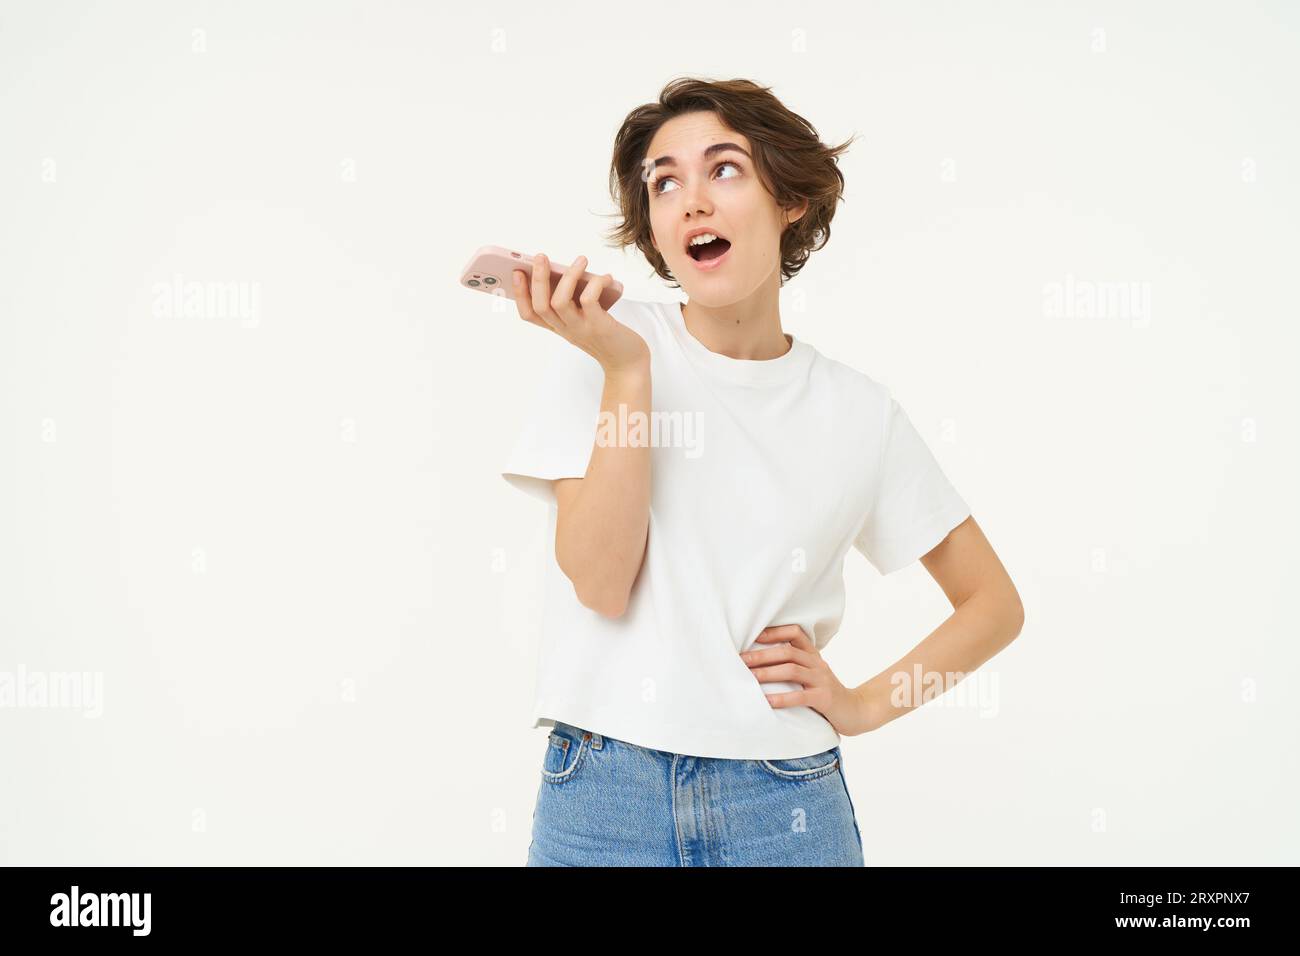 Portrait of chatty woman talking in speakerphone, records voice message on mobile phone and smiling, stands over white background Stock Photo